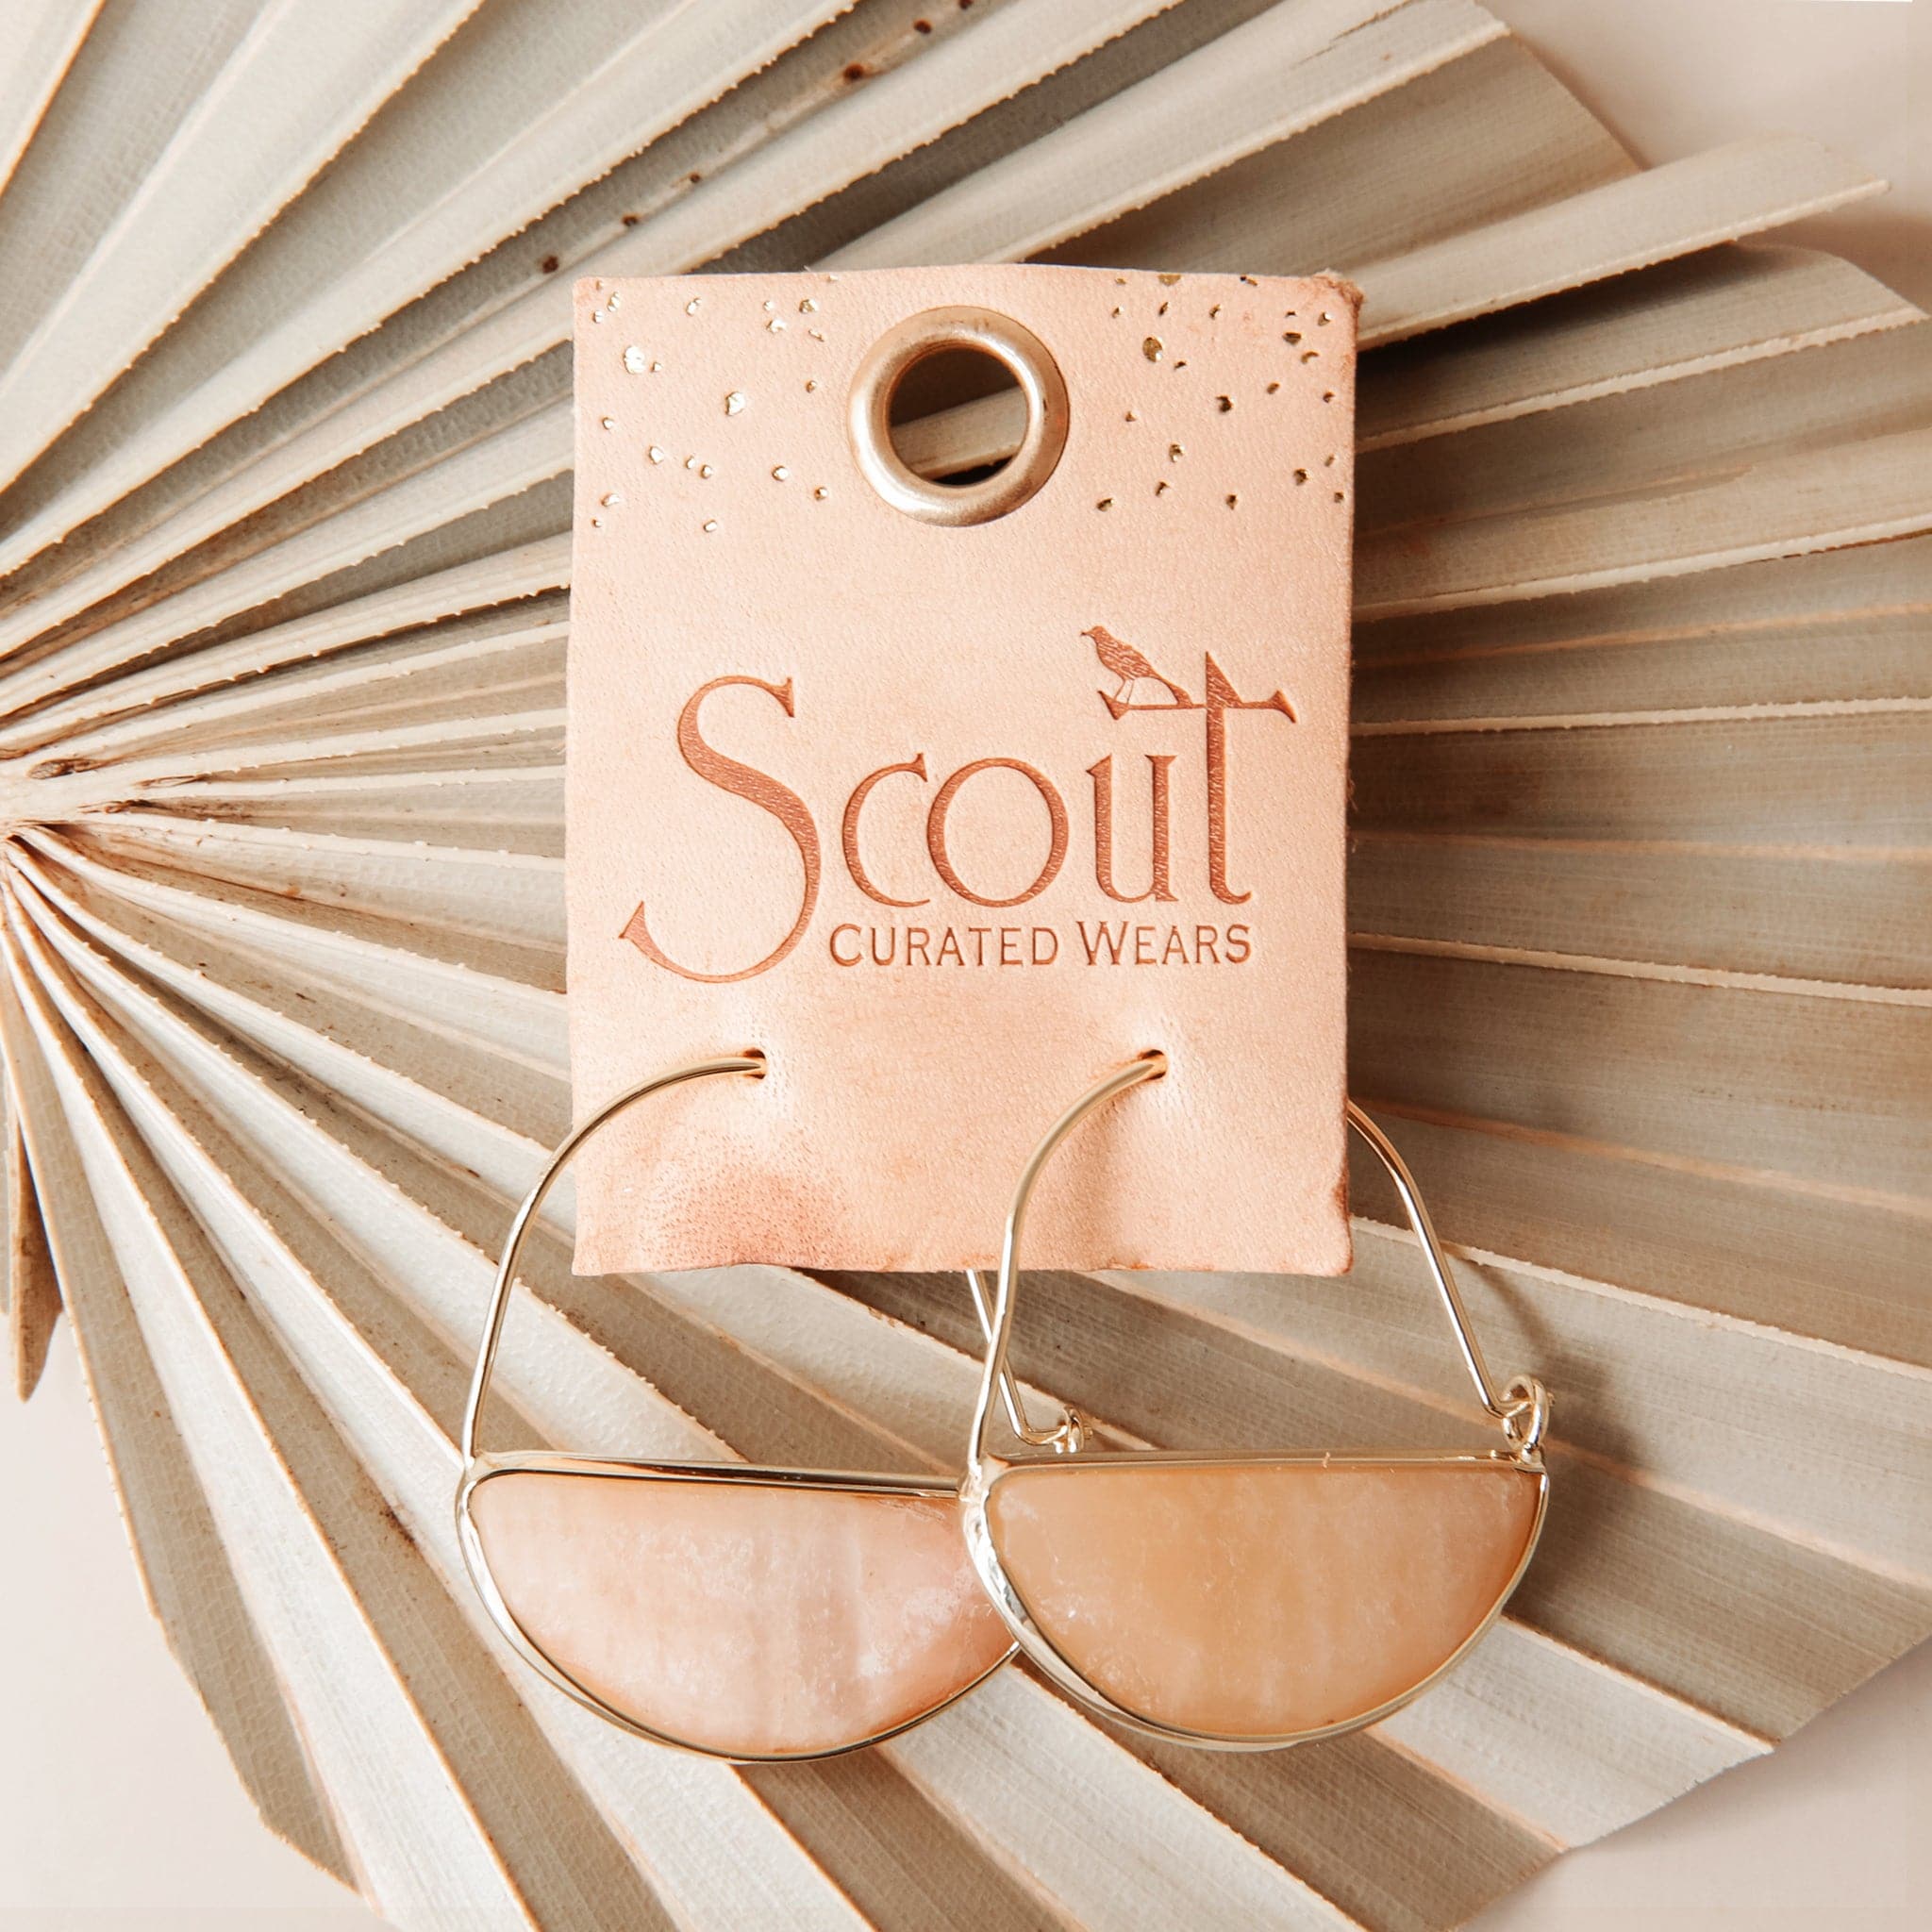 Laying on top of a dried palm frond is a pair of gold earrings. The top is a thin gold hoop. The bottom is a peach stone half circle with a gold border. The hoops are on a brown leather square holder. Etched in the middle the text reads ‘Scout curated wears.&#39;